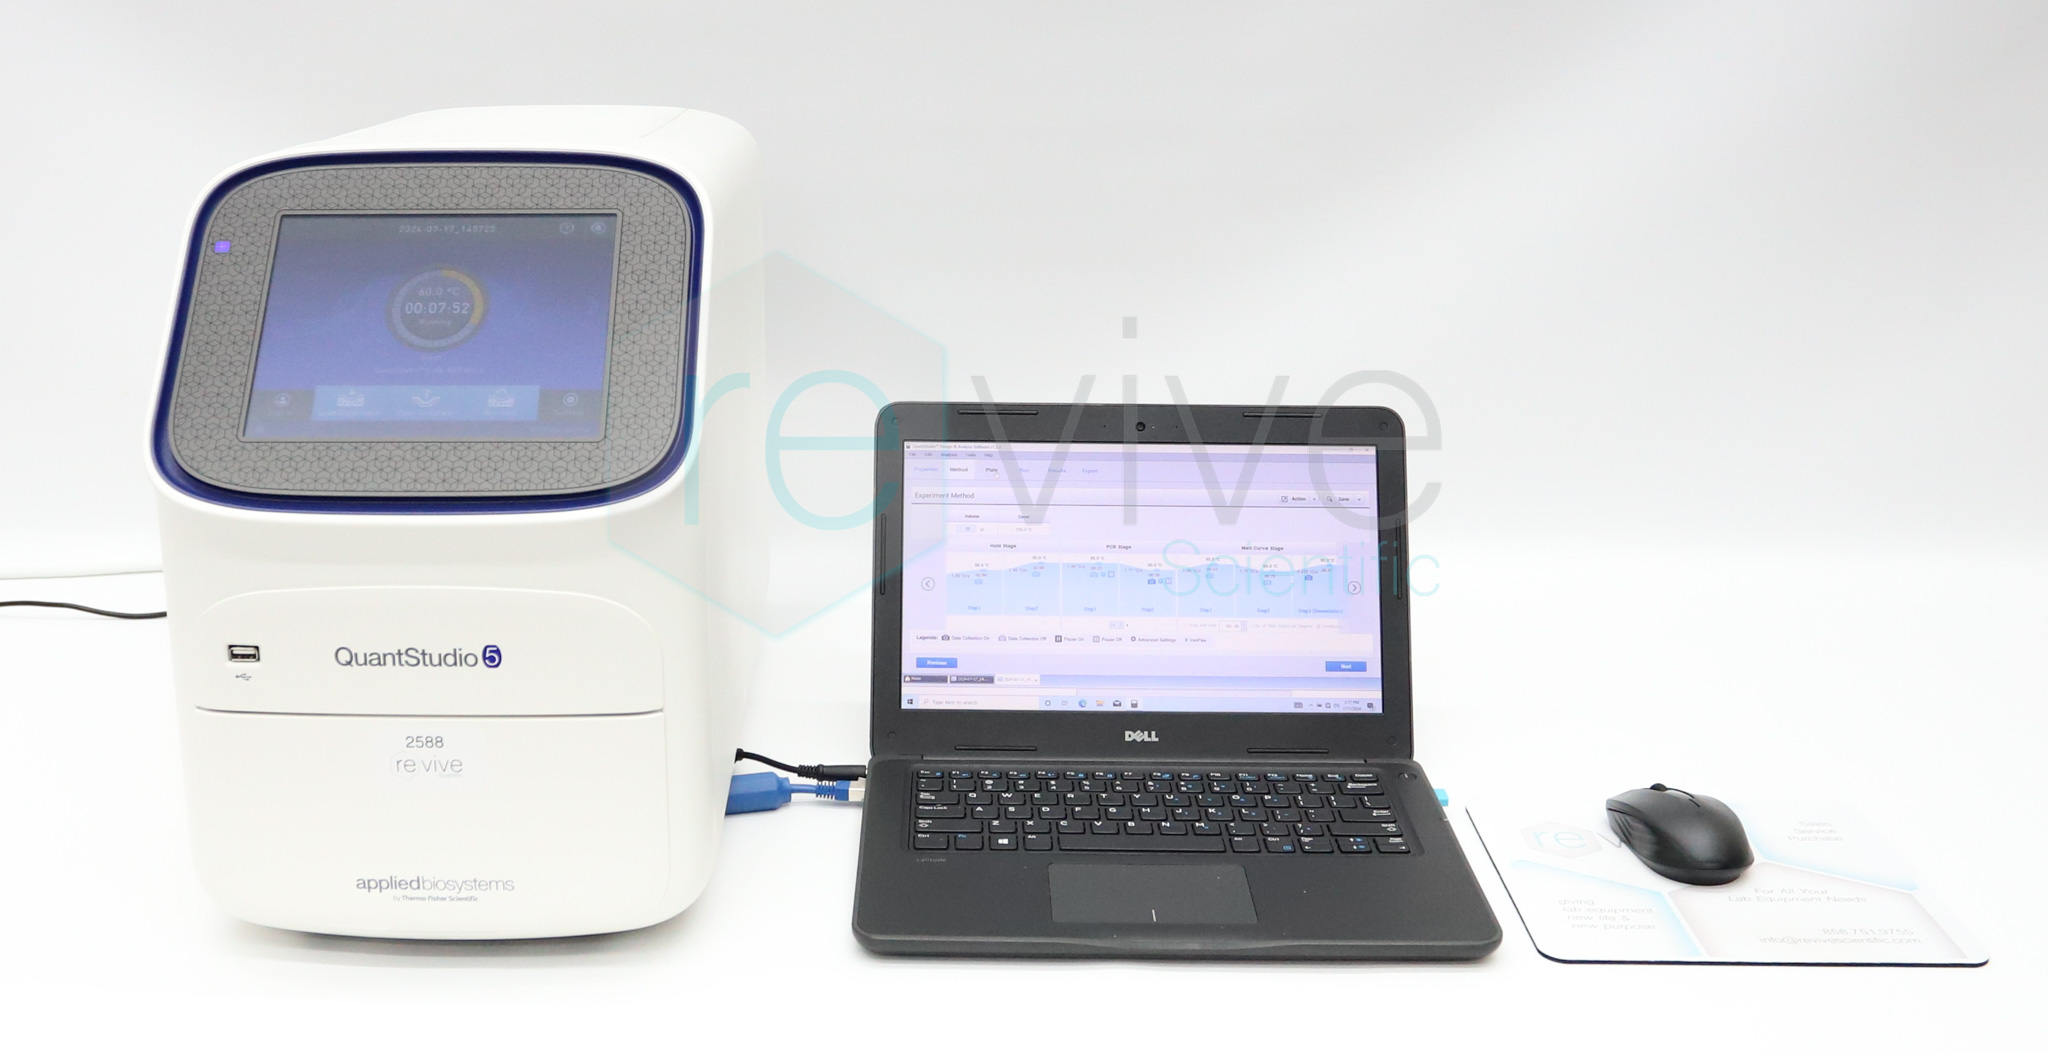 Applied Biosystems QuantStudio 5 Real-Time PCR Instrument 384